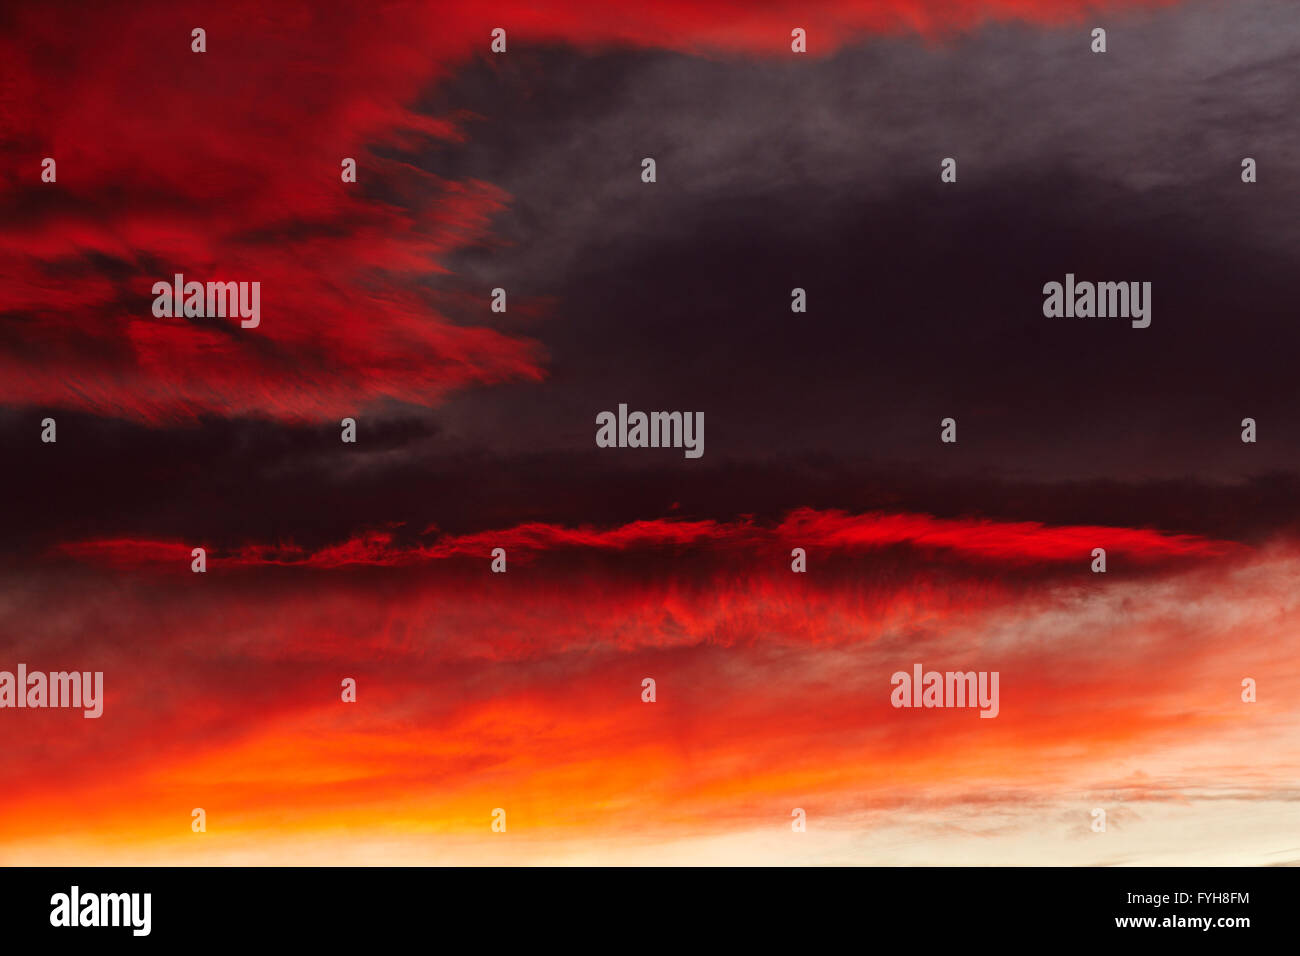 Winter sunset with red clouds. Stock Photo